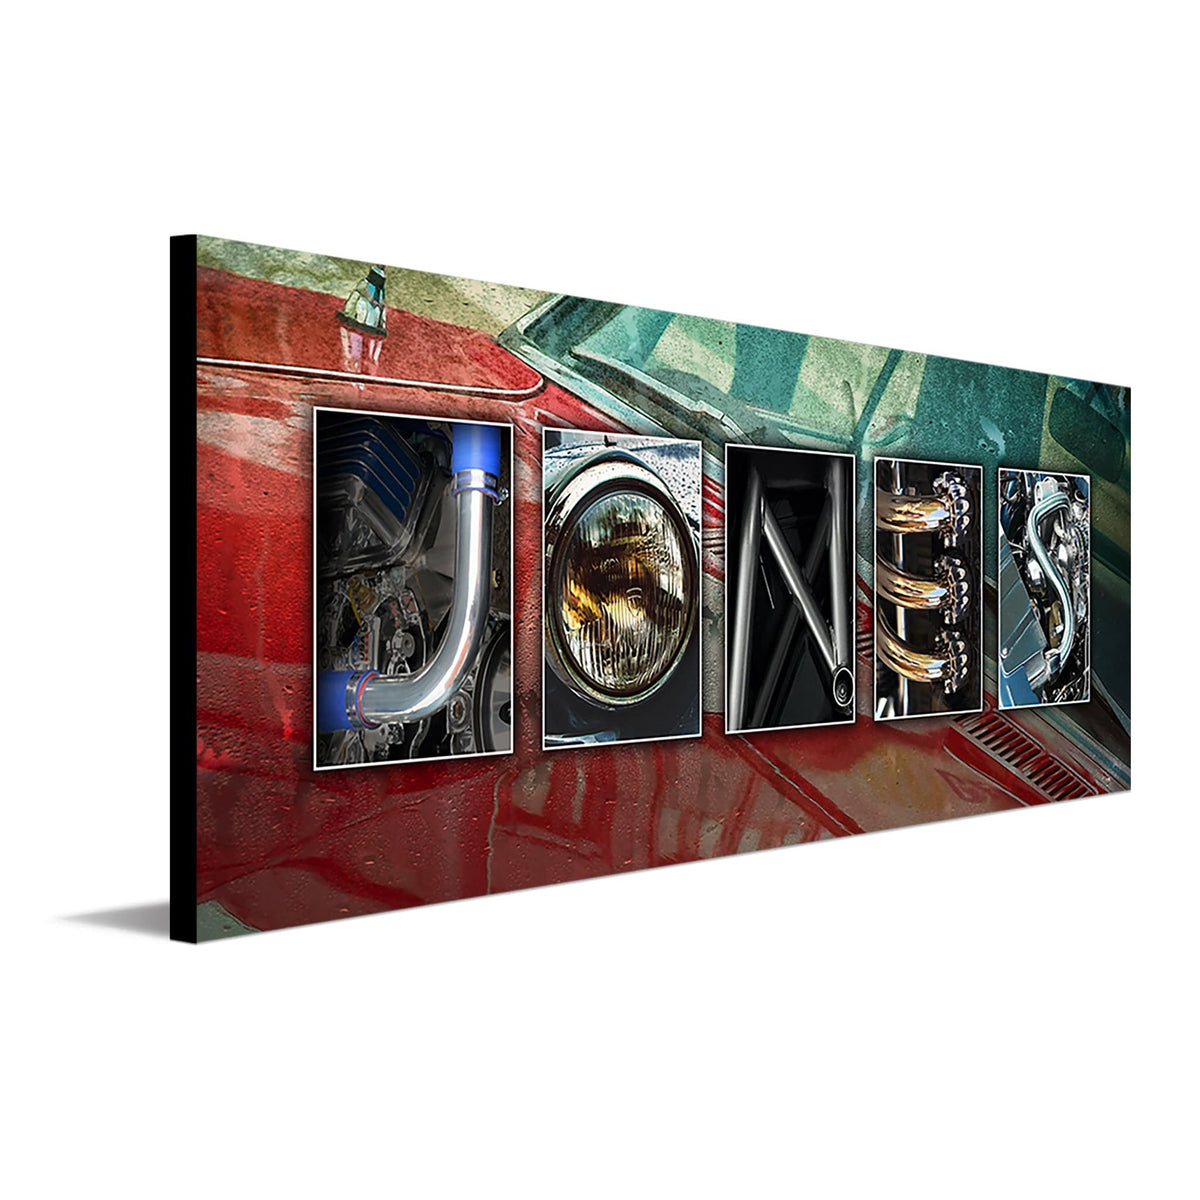 Personal-Prints Automobile Cars Letter Name Print.